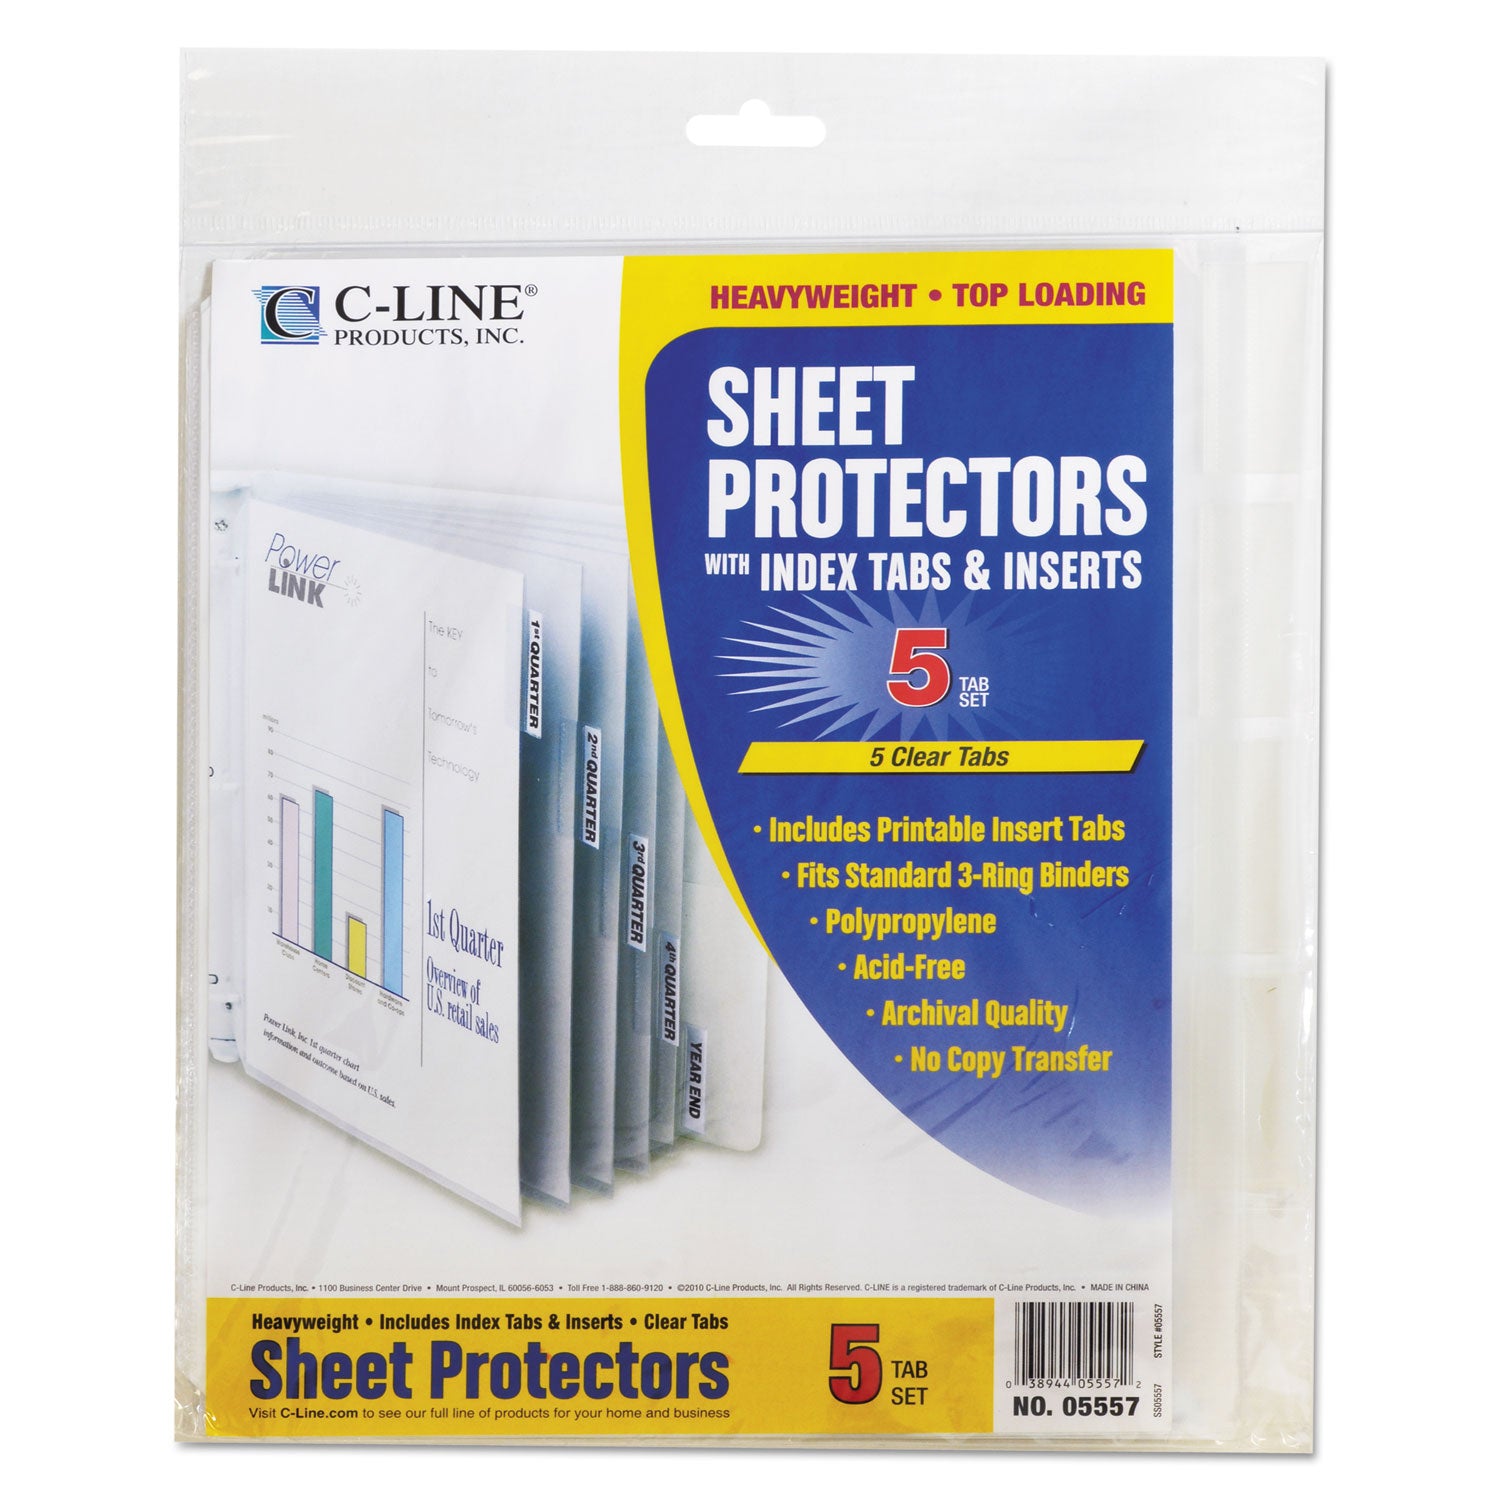 sheet-protectors-with-index-tabs-heavy-clear-tabs-2-11-x-85-5-set_cli05557 - 2